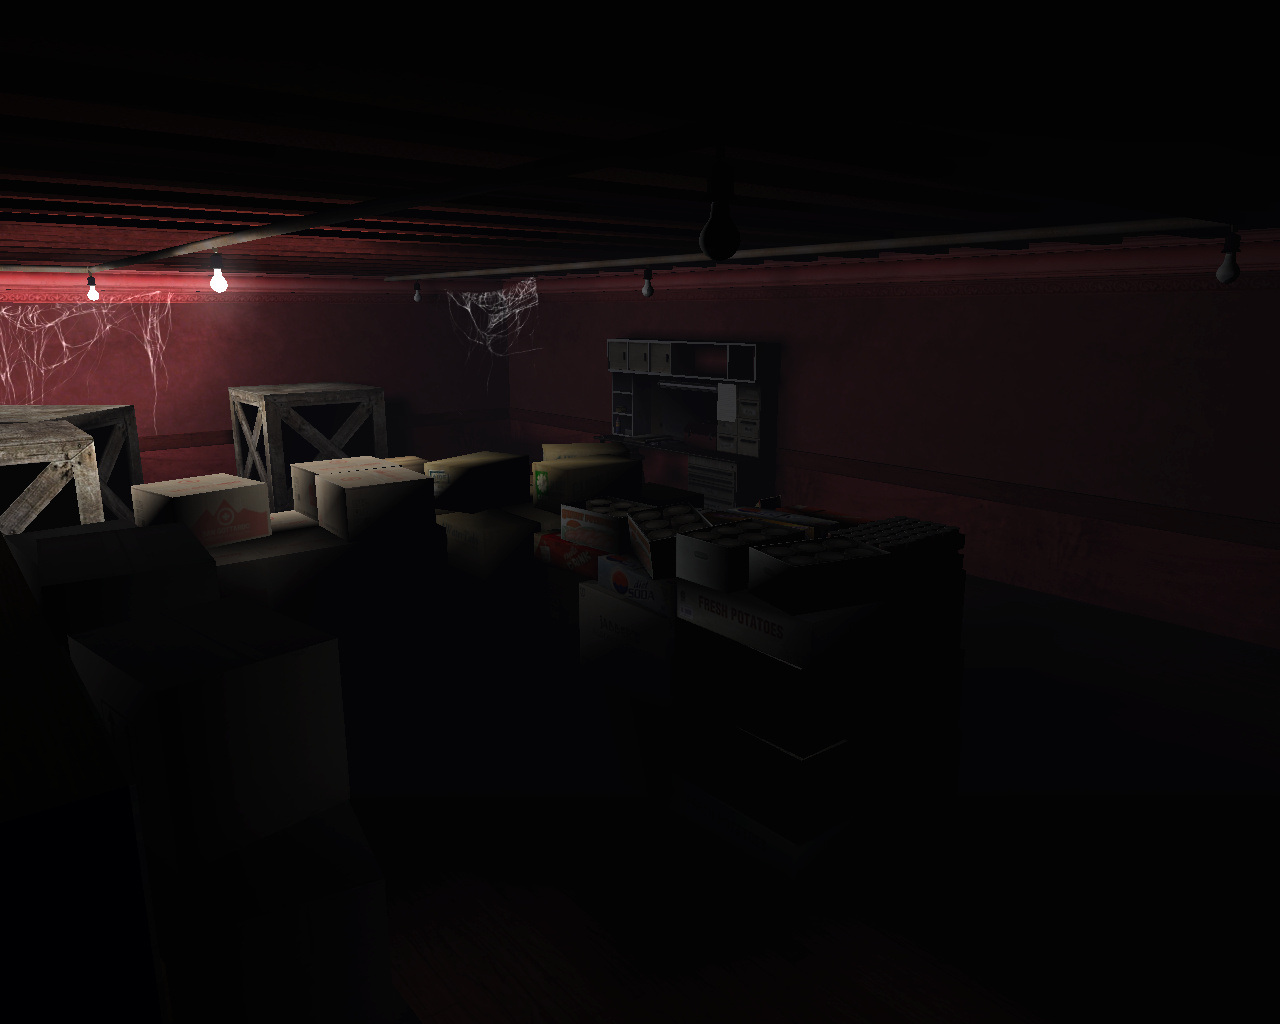 WELCOME TO WIKIPEDIA SERVER ROOM! image - SCP: Five Nights at Freddy's Mod  for SCP - Containment Breach - Mod DB